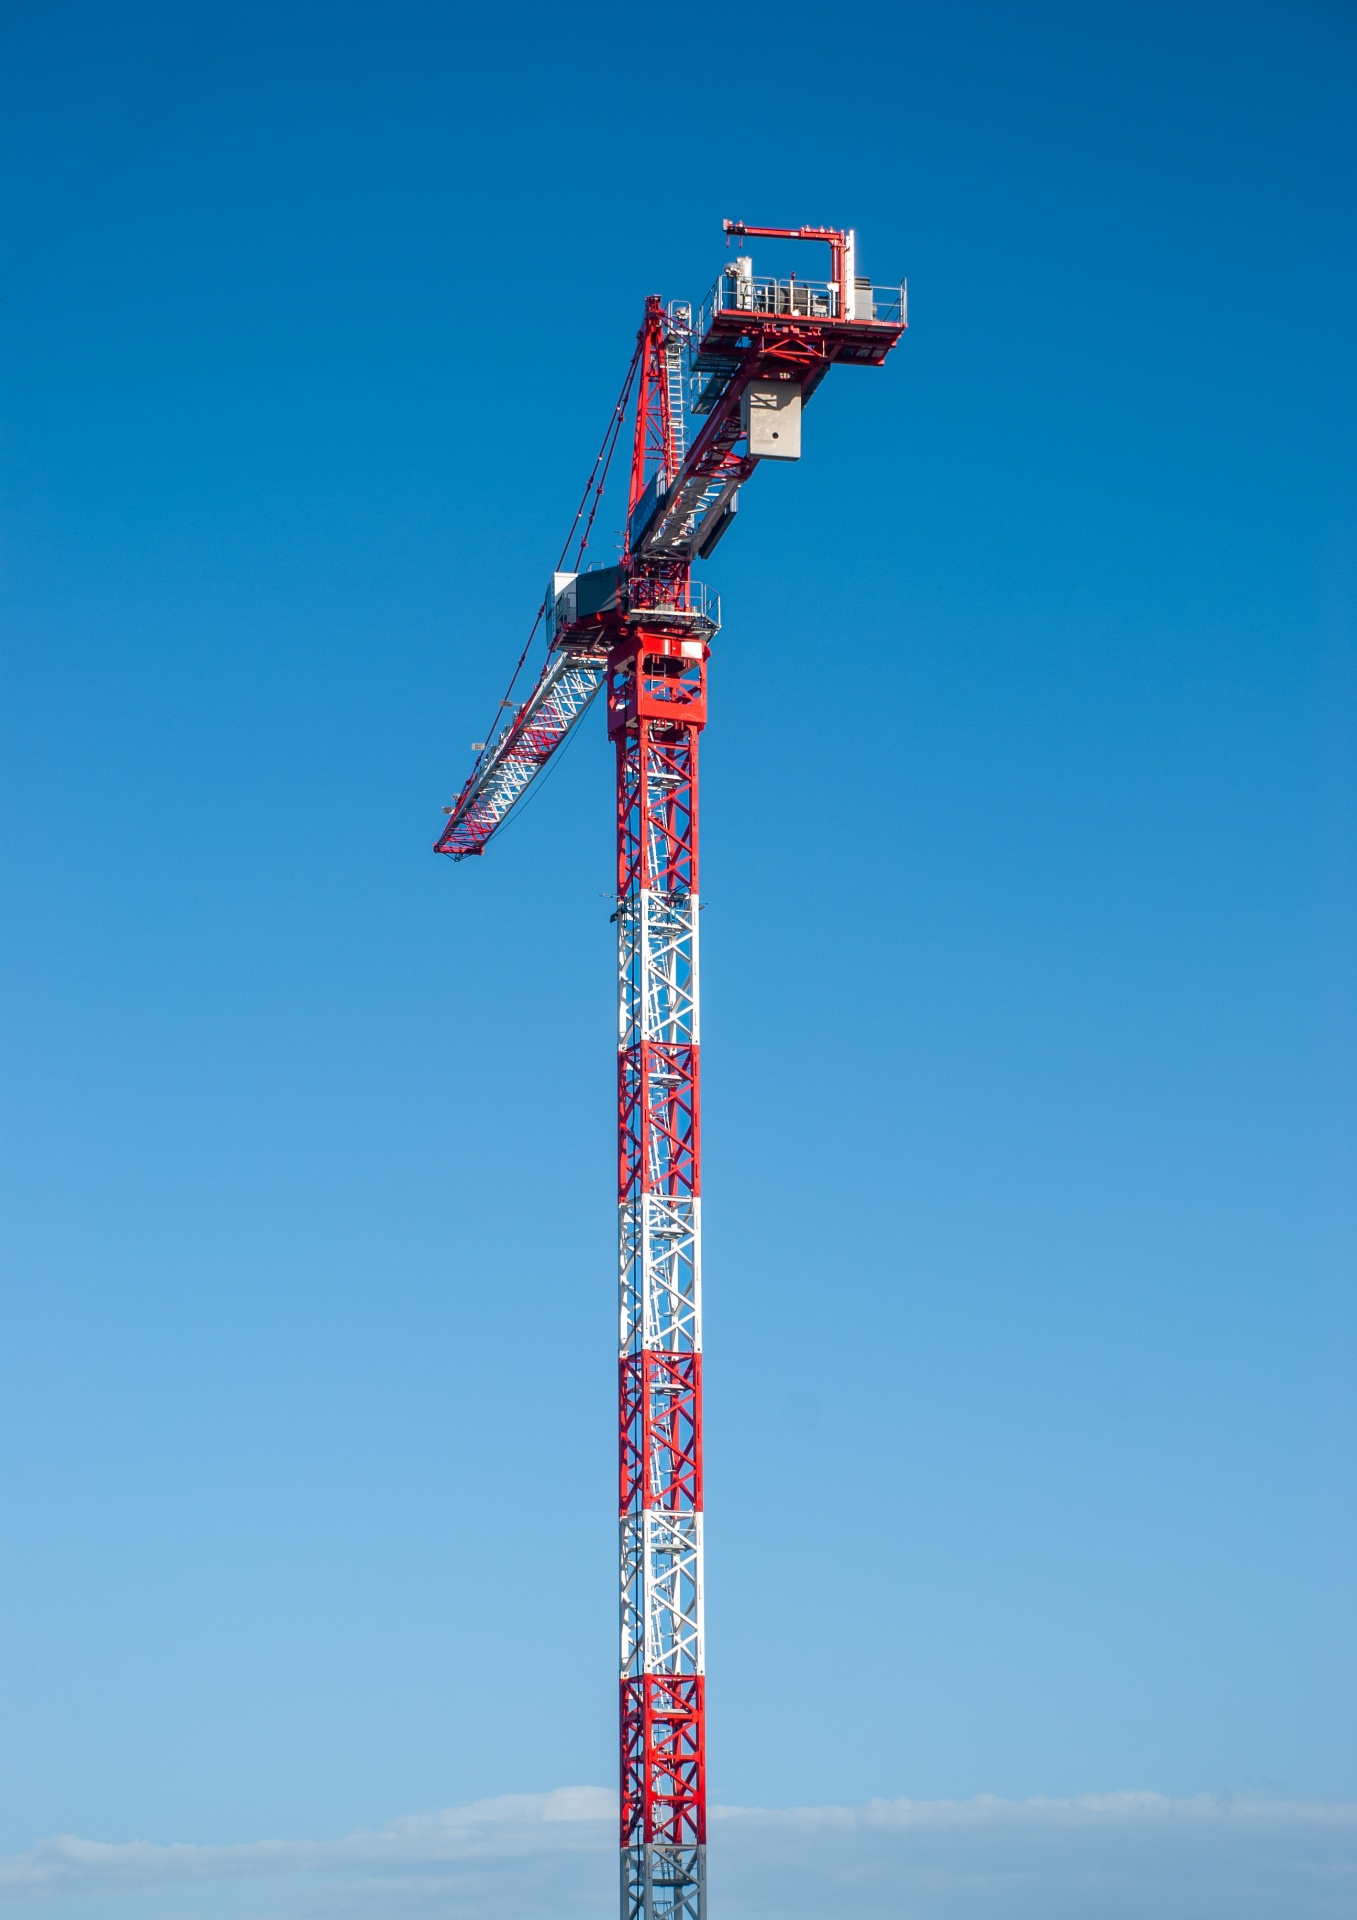 A tower crane on a blue background